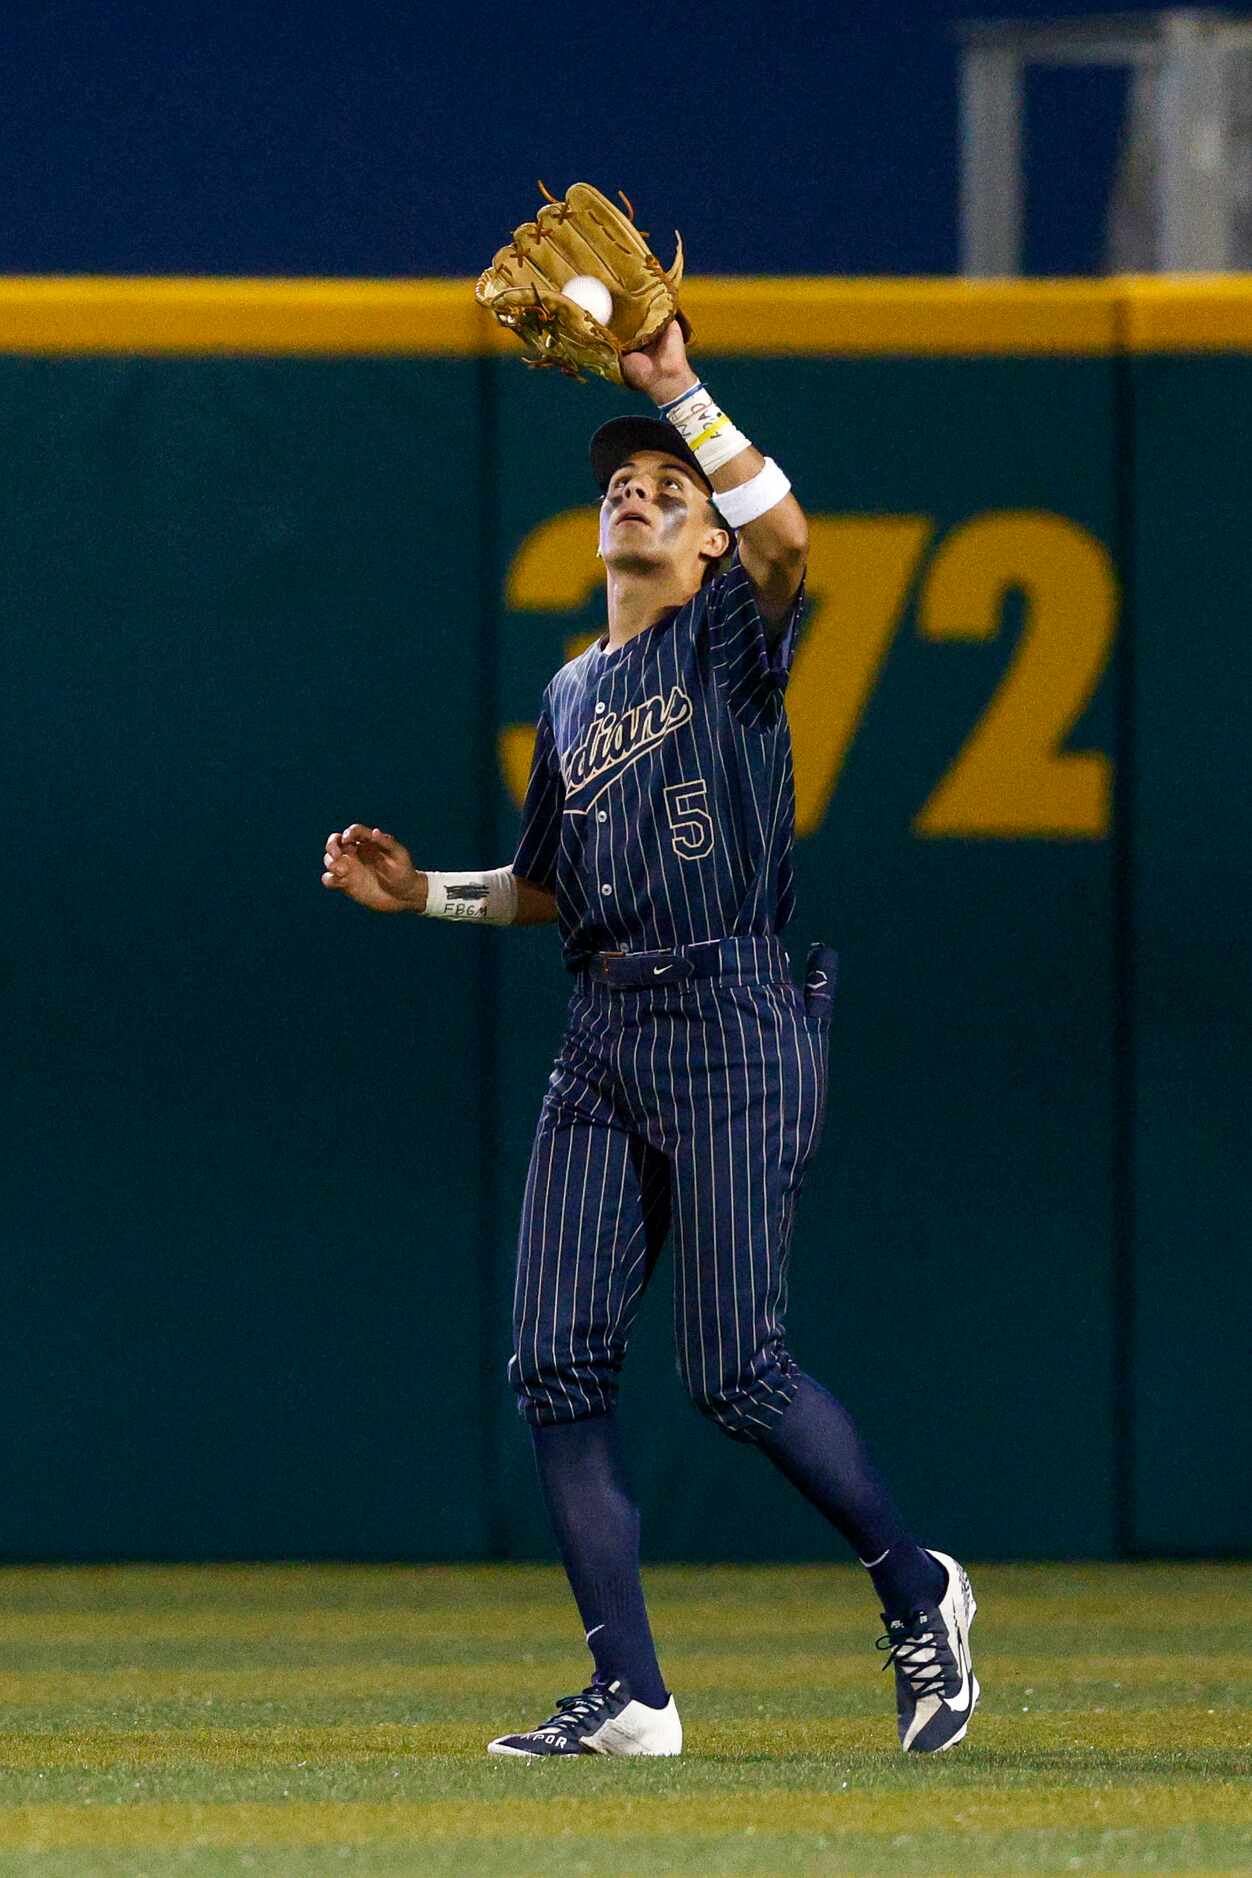 Keller centerfielder Jackson Hill (5) catches the ball for an out during the second inning...